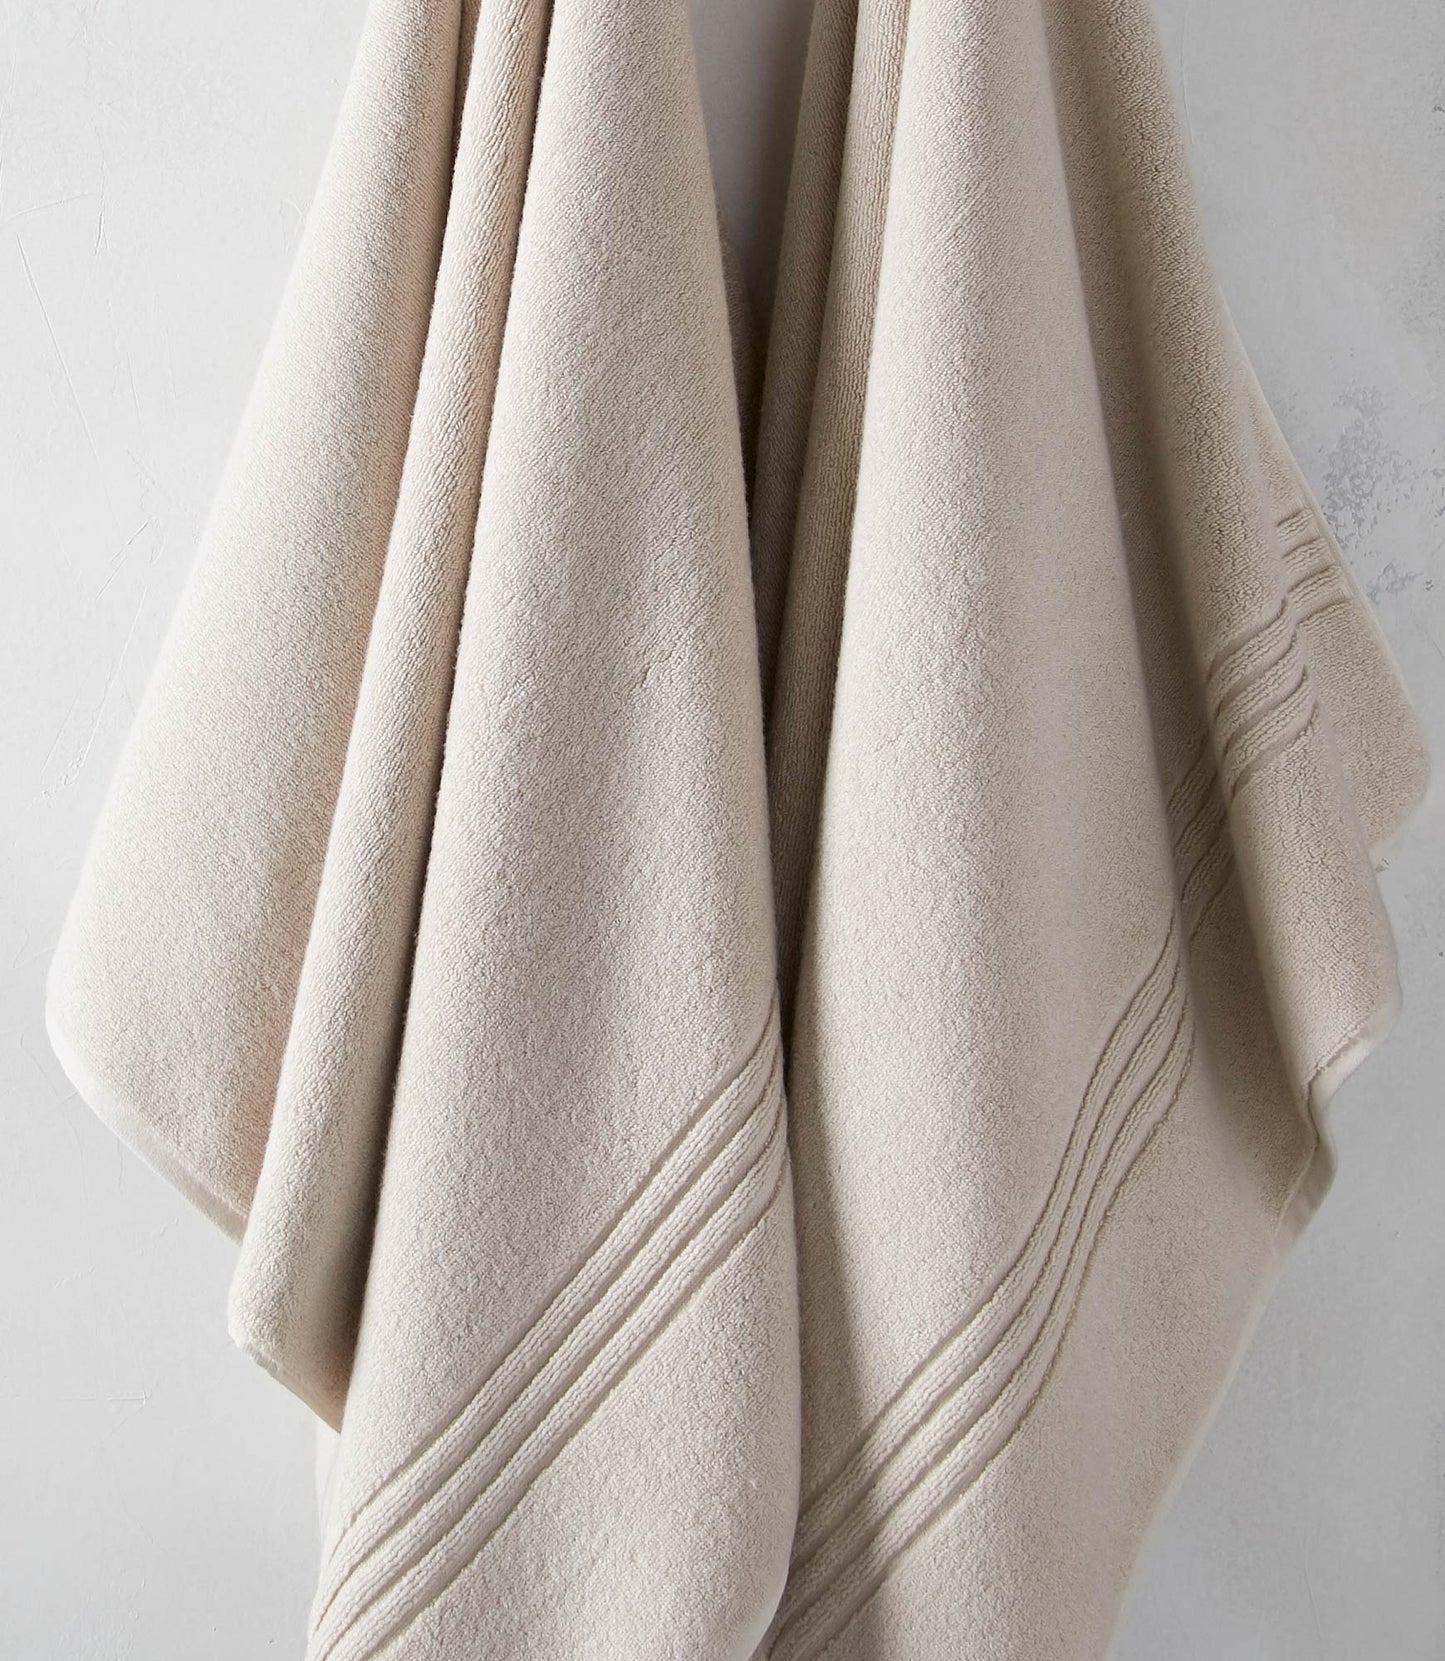 Peacock Alley Bamboo Bath Towels - Linen - Plush and Absorbent Towels